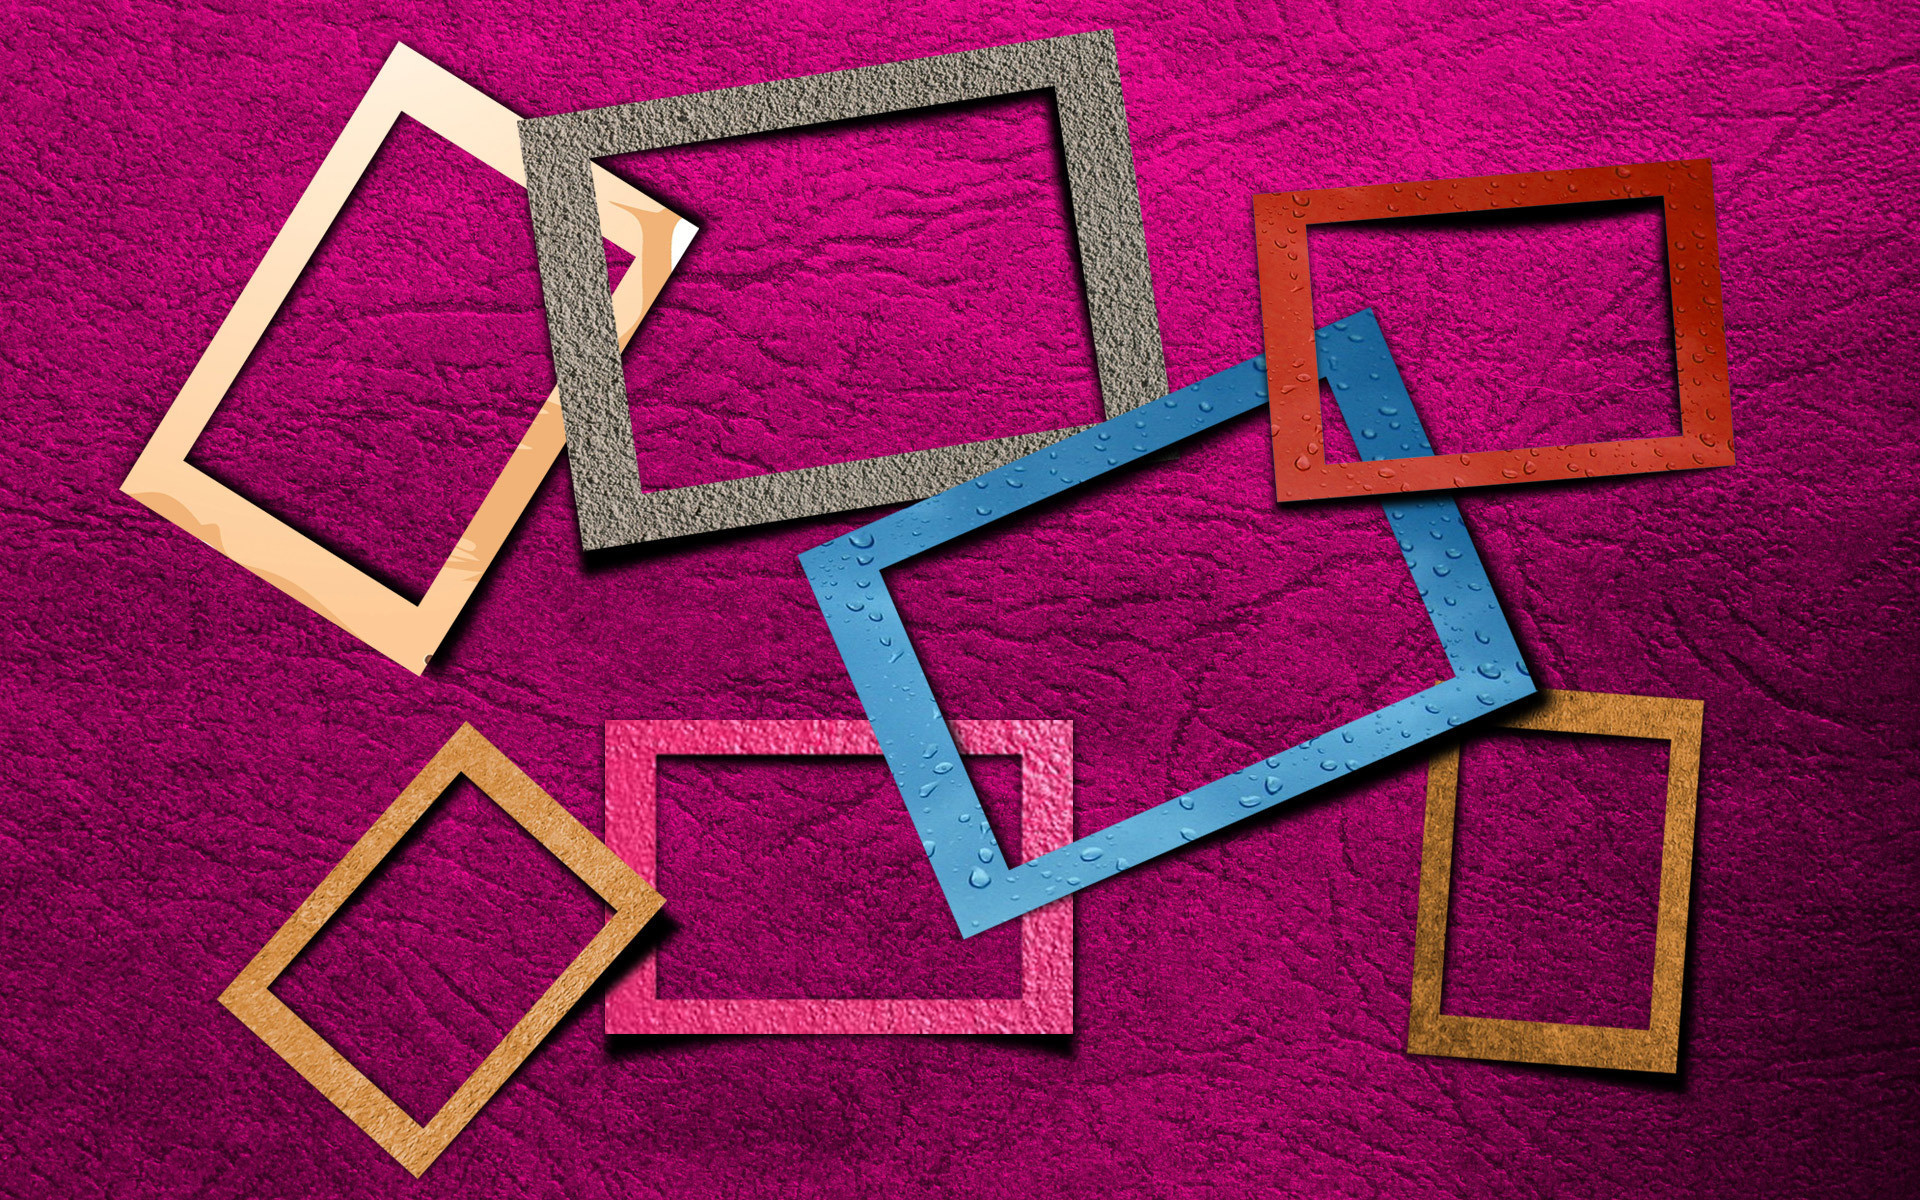 1920x1200  Textured picture frames HD Wallpaper 1920x1080 Textured picture  frames HD Wallpaper 